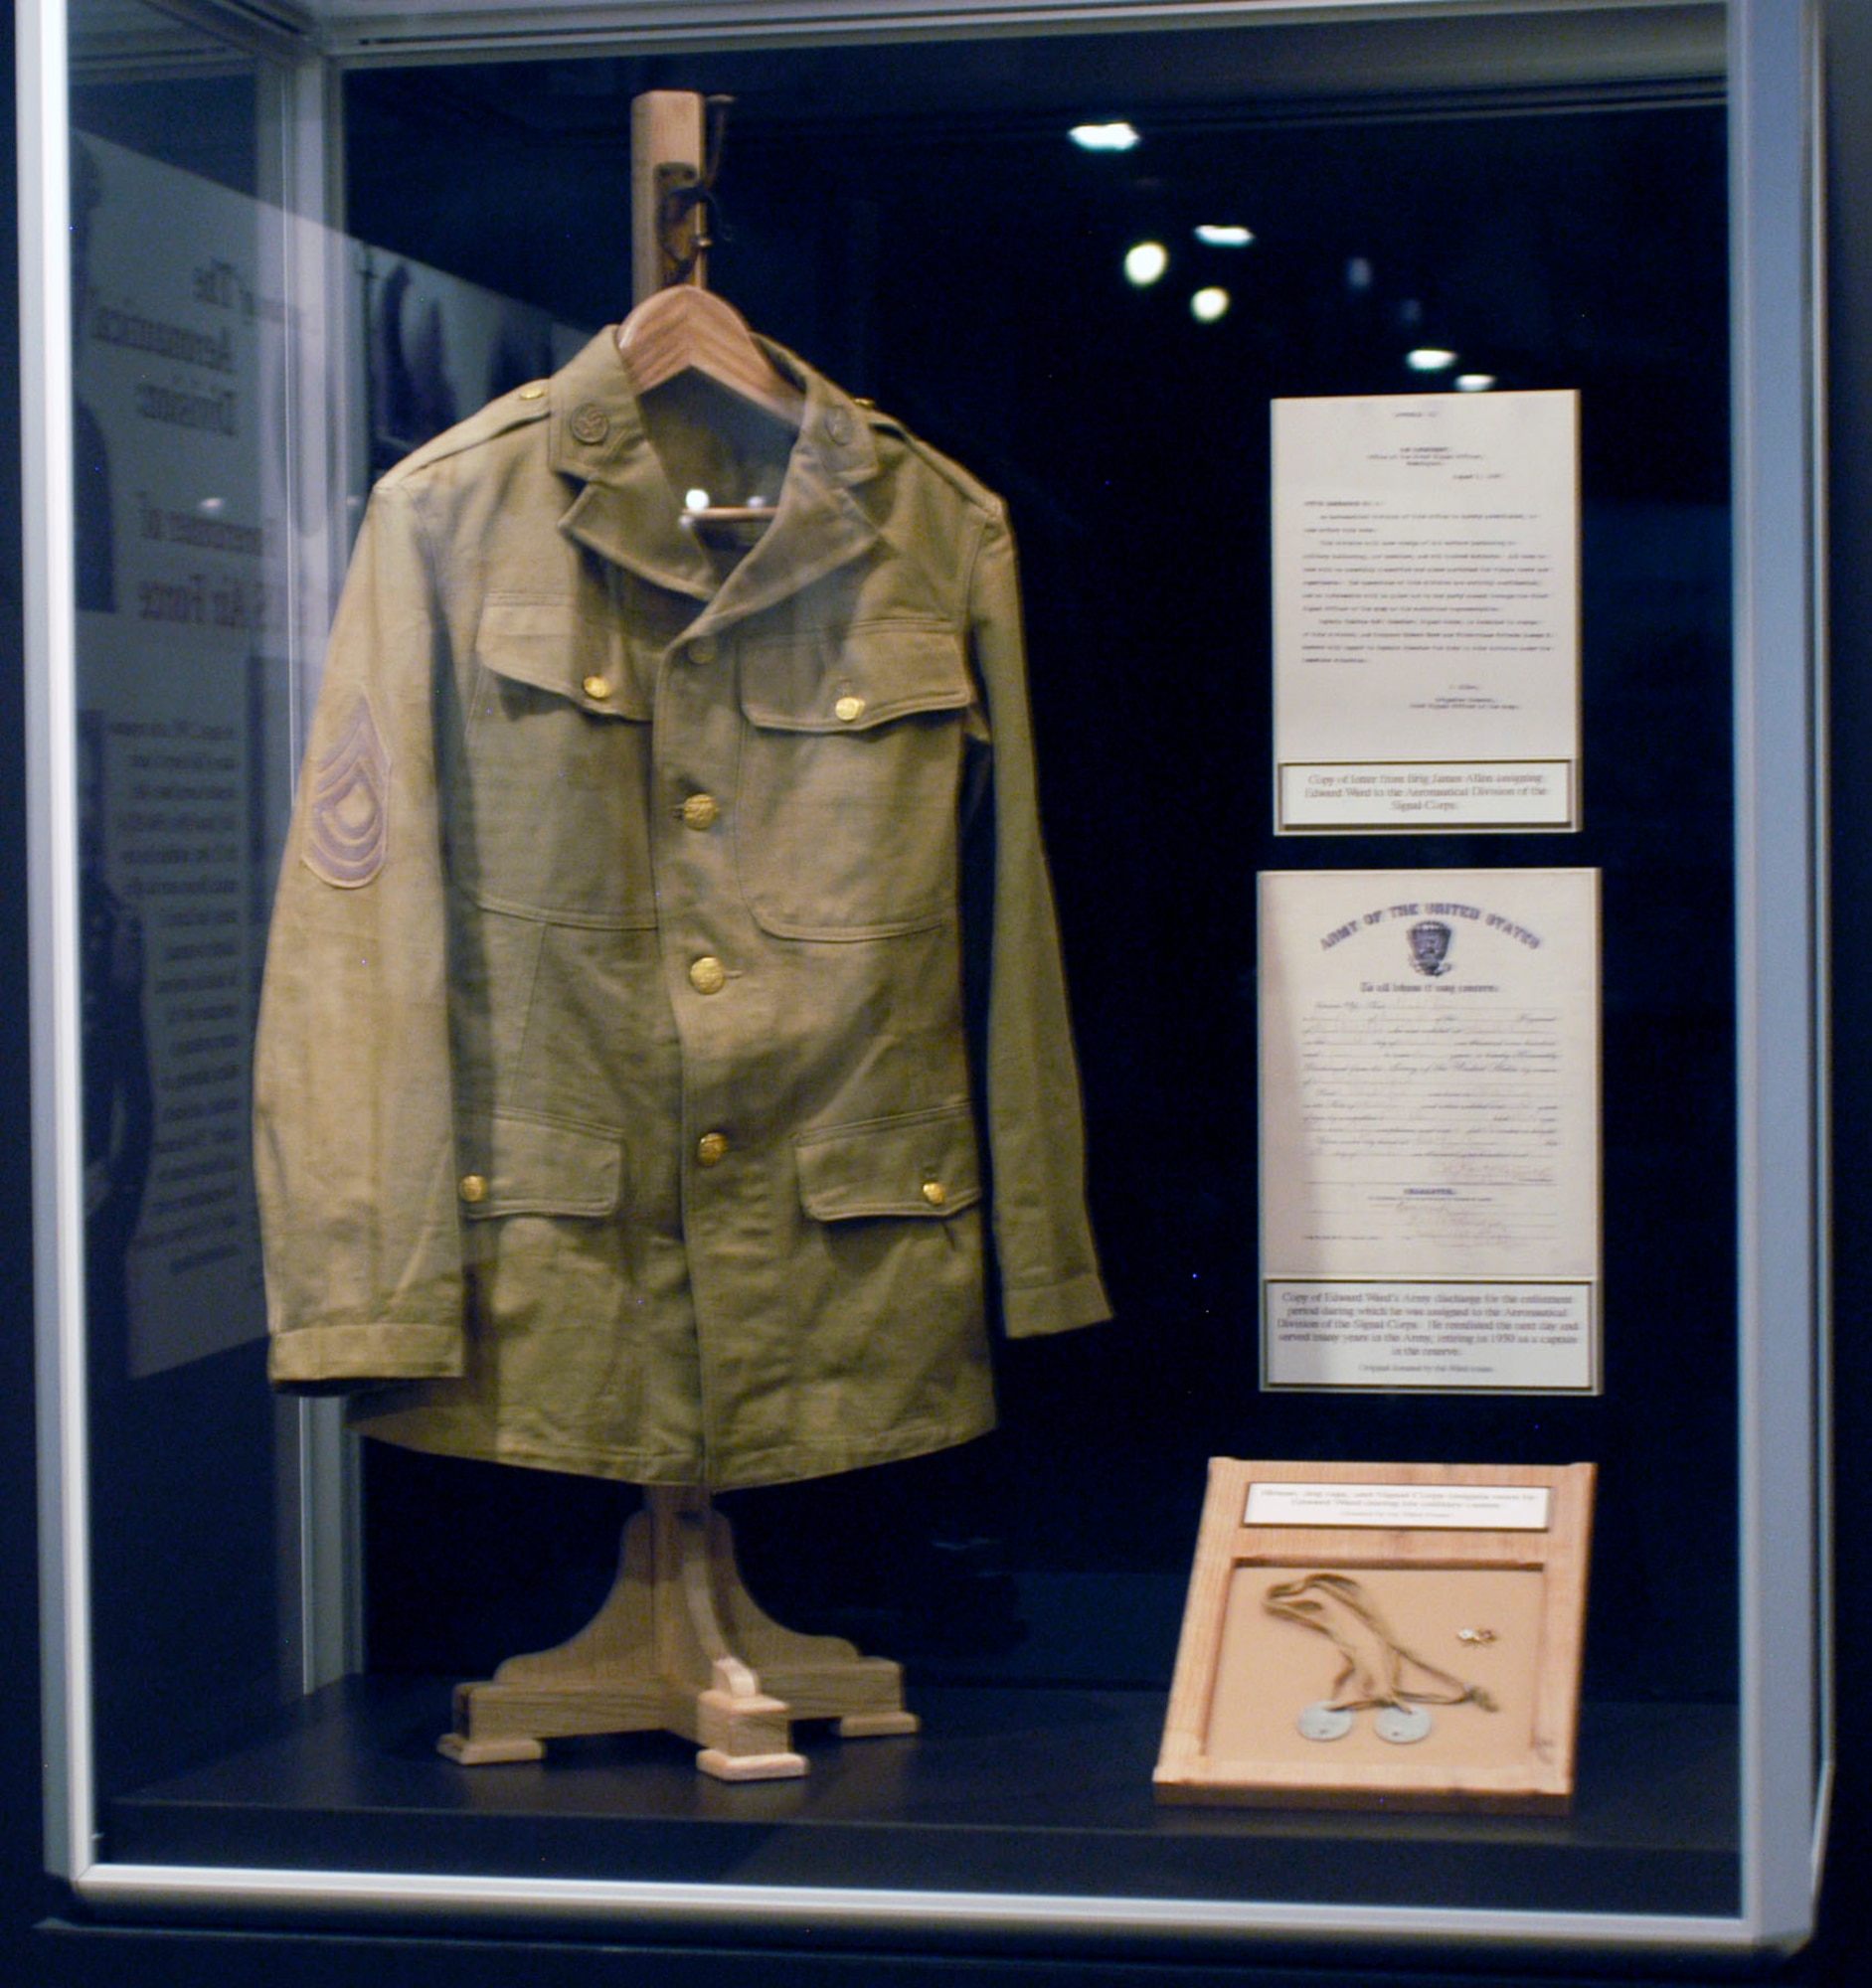 DAYTON, Ohio -- This blouse, on display in the Early Years Gallery, was worn by Edward Ward during his military career. Cpl. Ward was the first enlisted man to be assigned aviation duties in the Aeronautical Division of the Signal Corps. The items were donated by the Ward Family. (U.S. Air Force photo)
